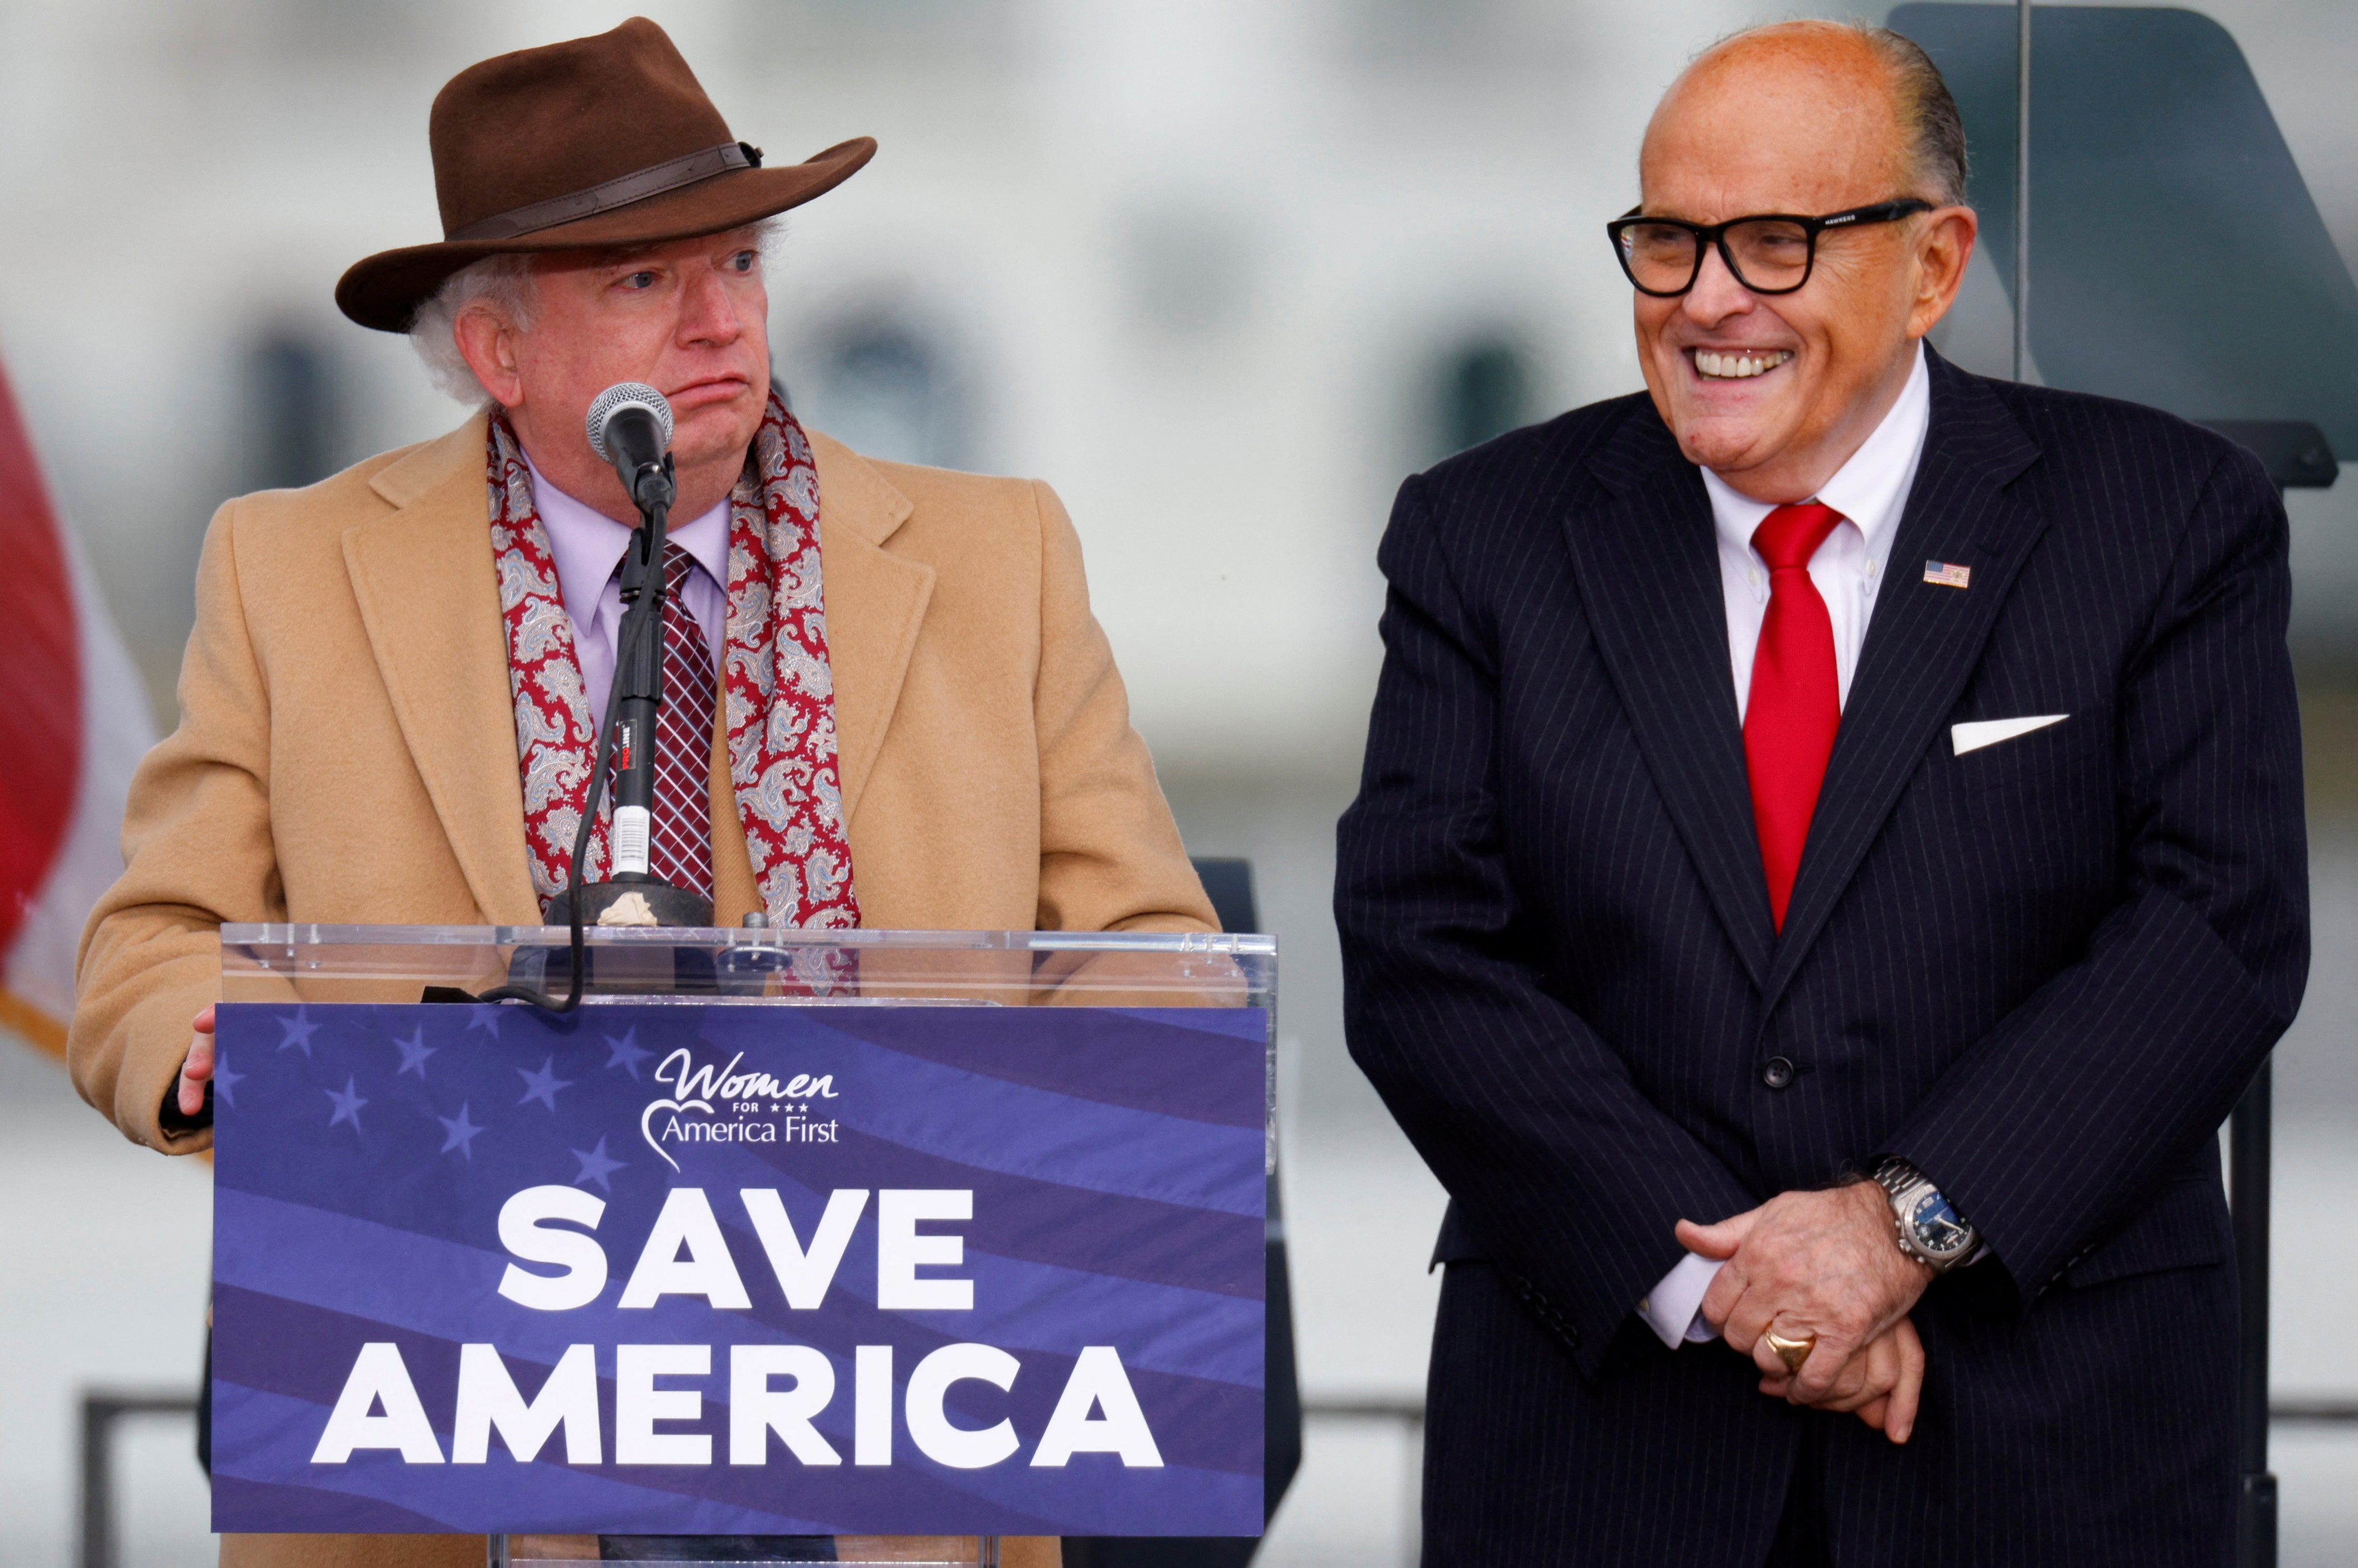 John Eastman and Rudy Giuliani speaking at the Ellipse to Donald Trump supporters on January 6 2021